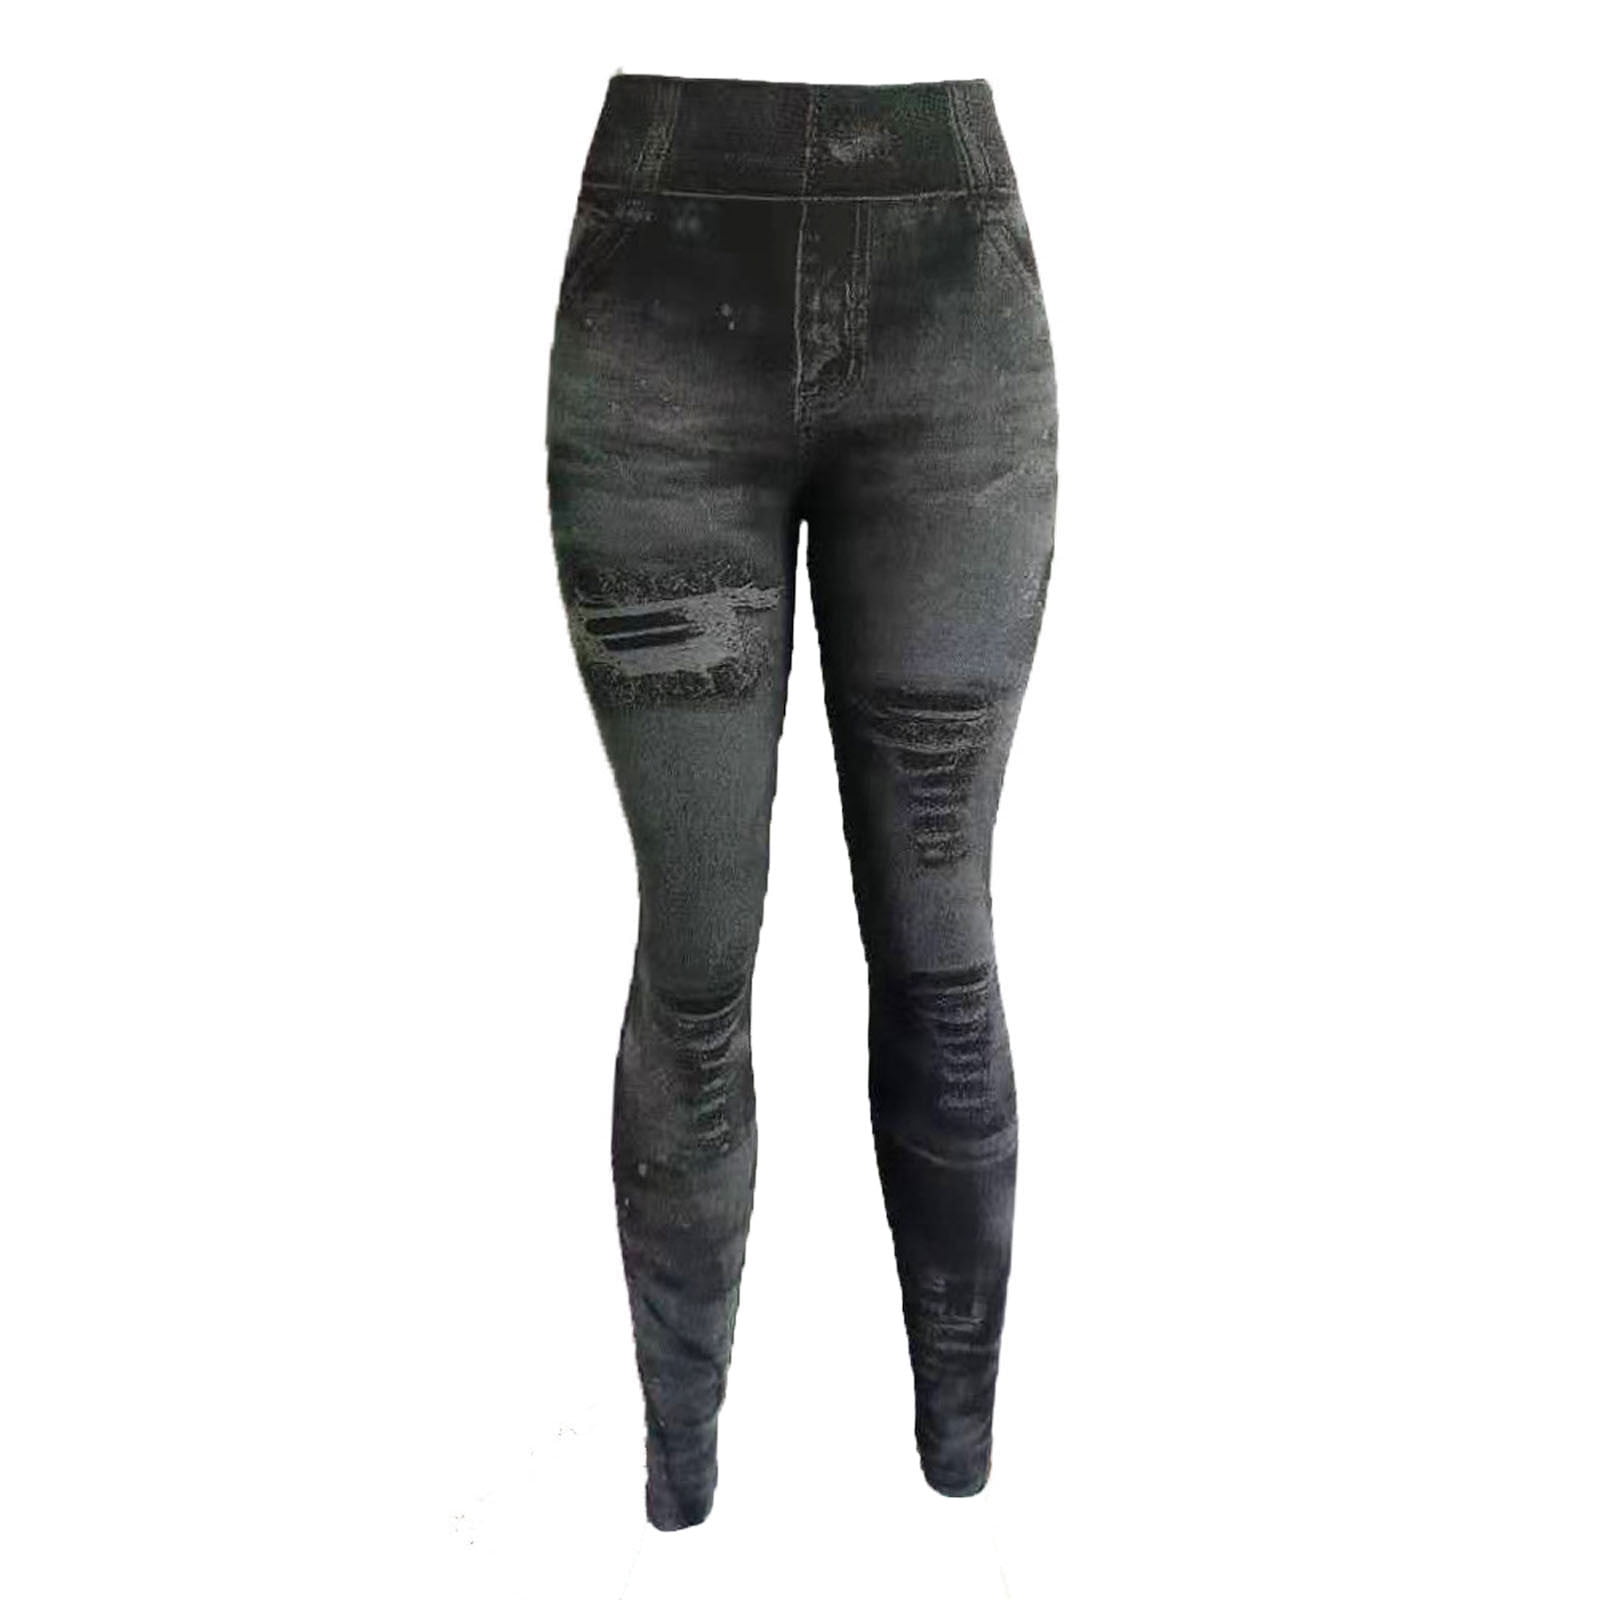 Faux Denim Leggings for Women High Waist,Plus Size Imitation Ripped  Distressed Jeggings Skinny Jeans Soft Stretch Jeggings Slim Fit Pants Butt  Lift Trousers 